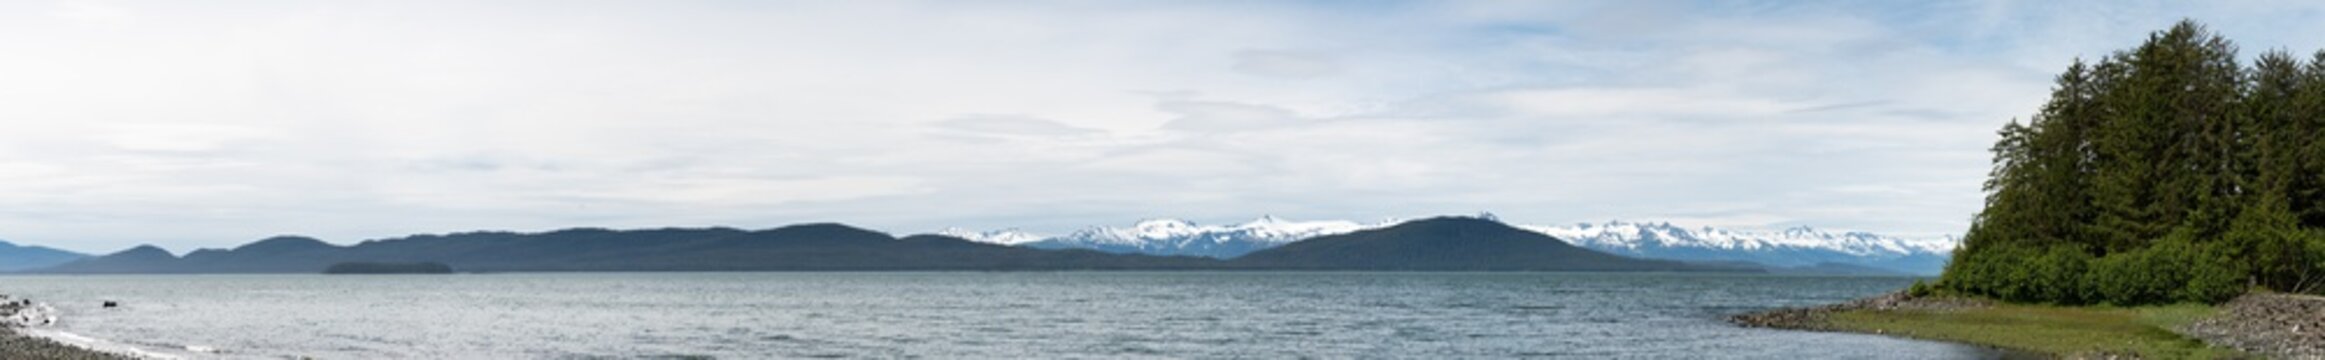 Panorama over water with mountains